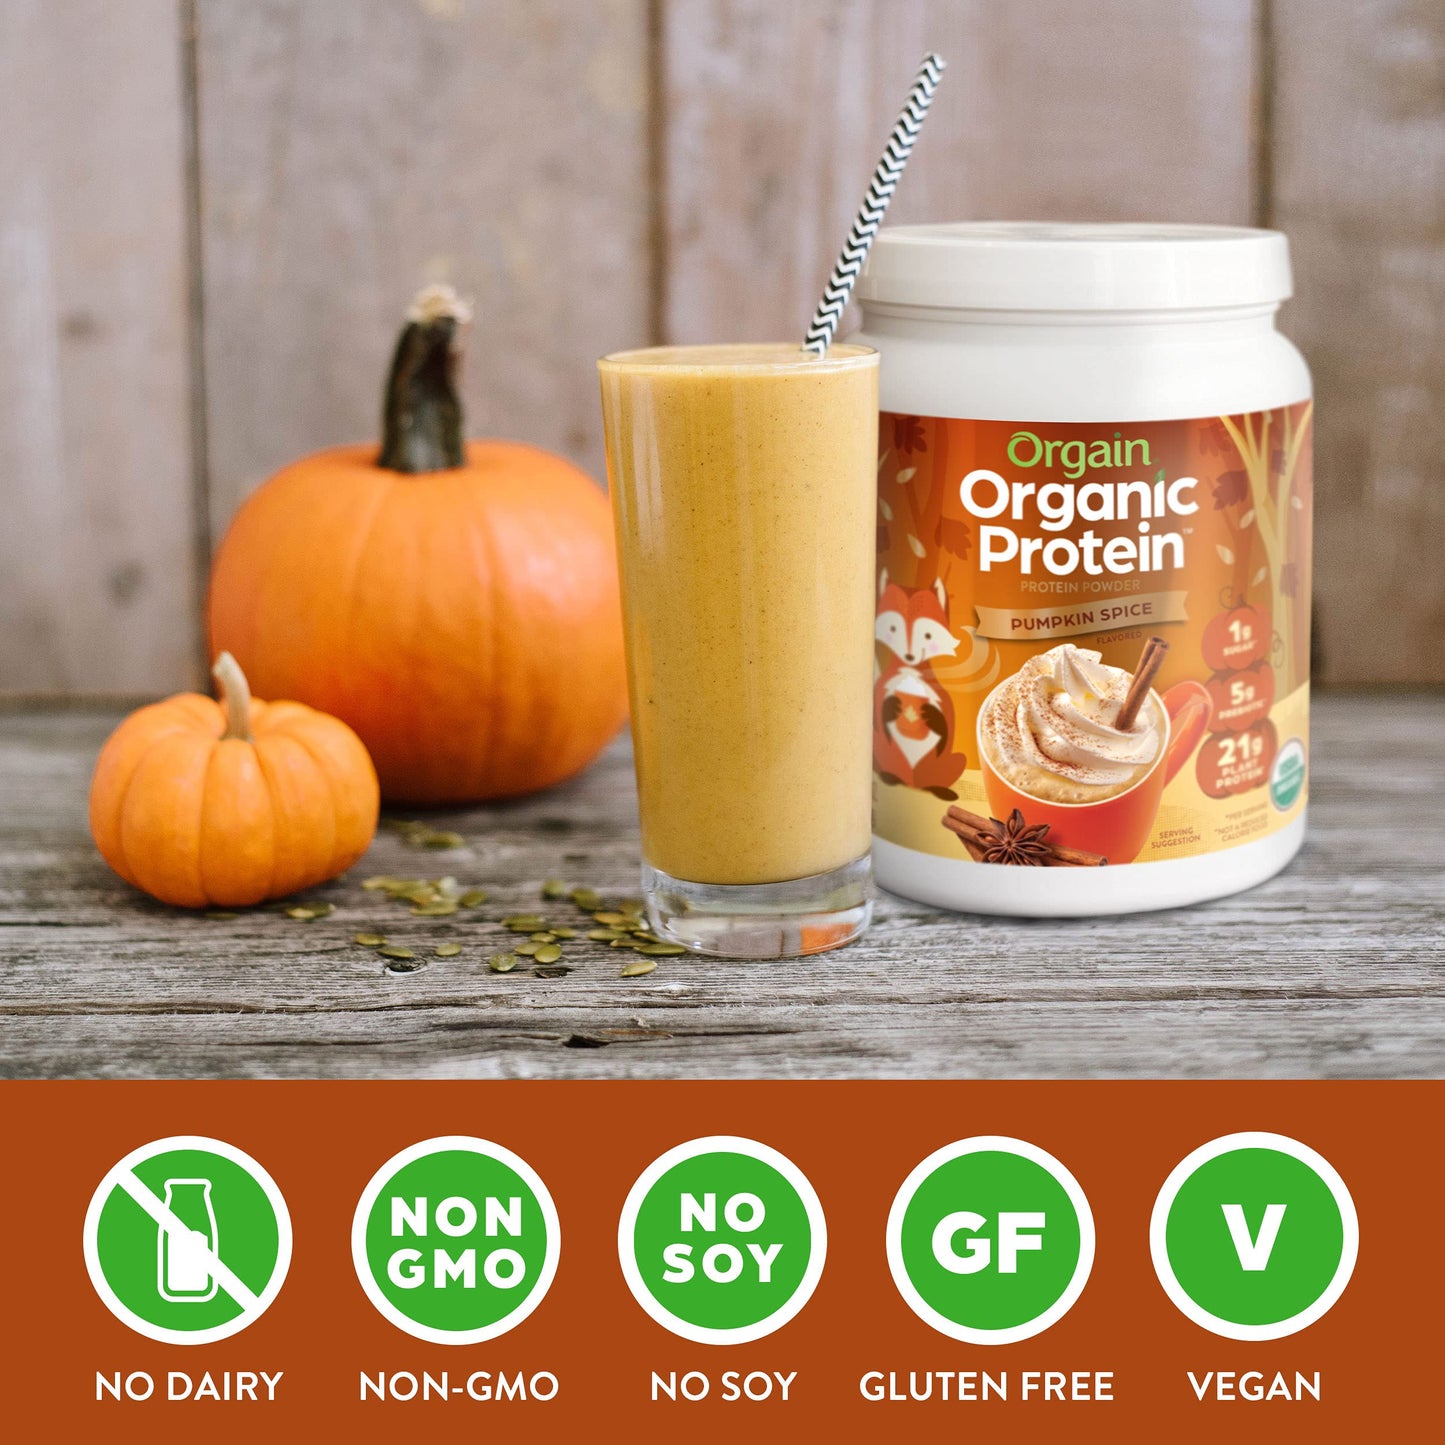 Orgain Organic Vegan Protein Powder, Pumpkin Spice - 21g of Plant Based Protein, Non Dairy, Gluten Free, 1g of Sugar, Soy Free, Kosher, Non-GMO, 1.02 Lb (Packaging May Vary)